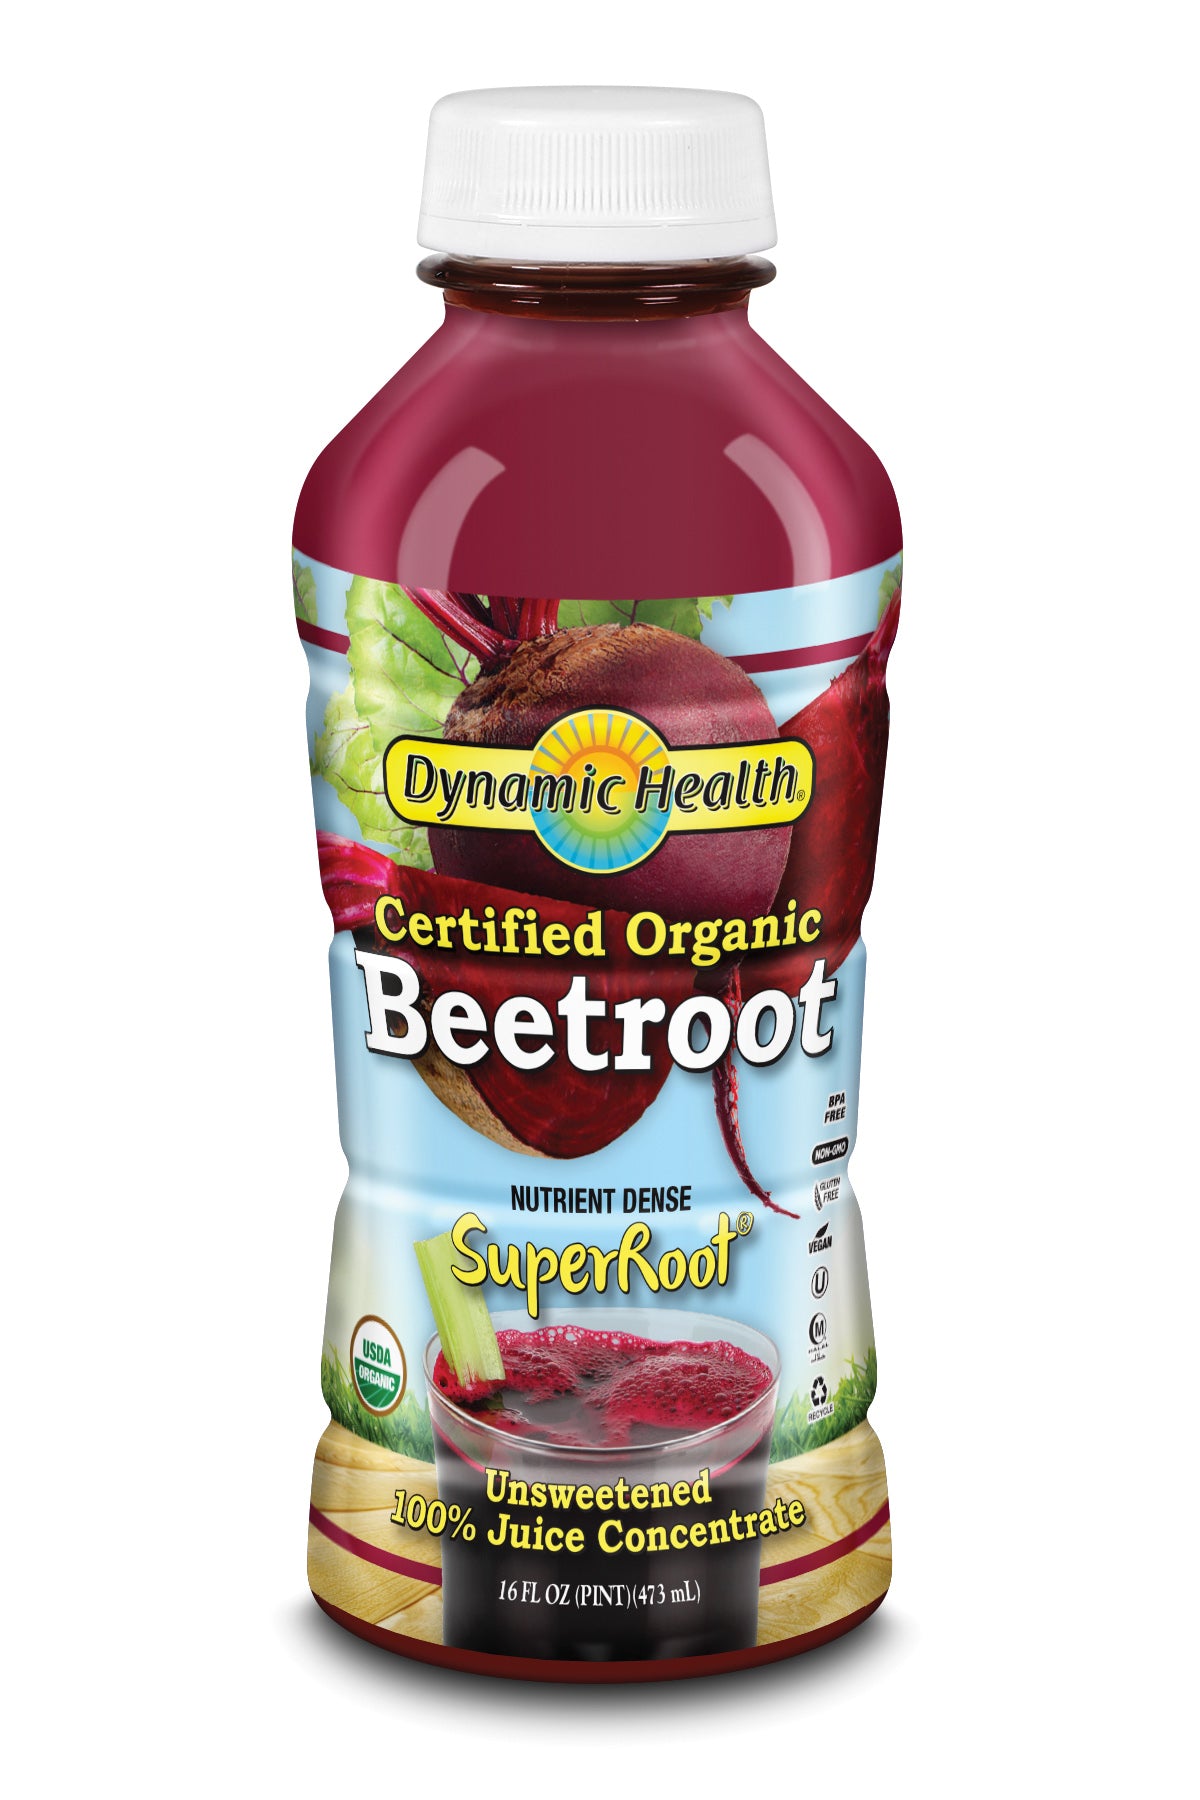 Beetroot Juice Concentrate - 16-Fl-Oz-(473-mL)